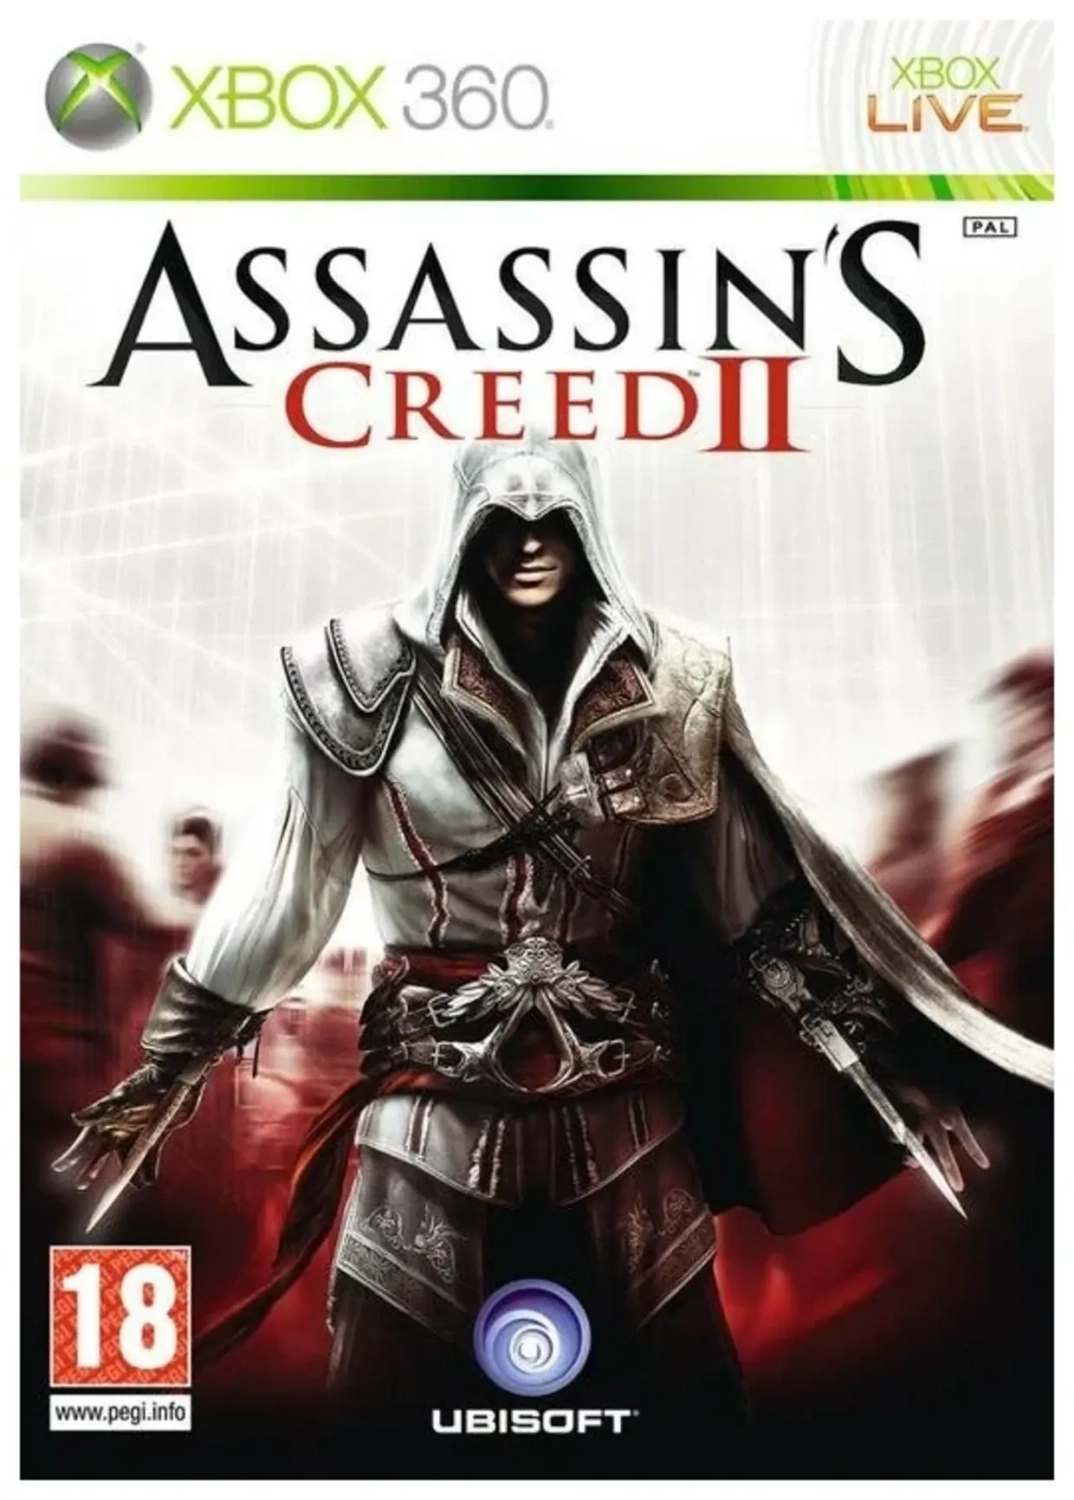 Games assassin creed 2. Assassin's Creed 2 на ps3 диск. Creed II ps3. Ассасин Крид 2 диск пс3. Диск ассасин Крид 2 ps3.